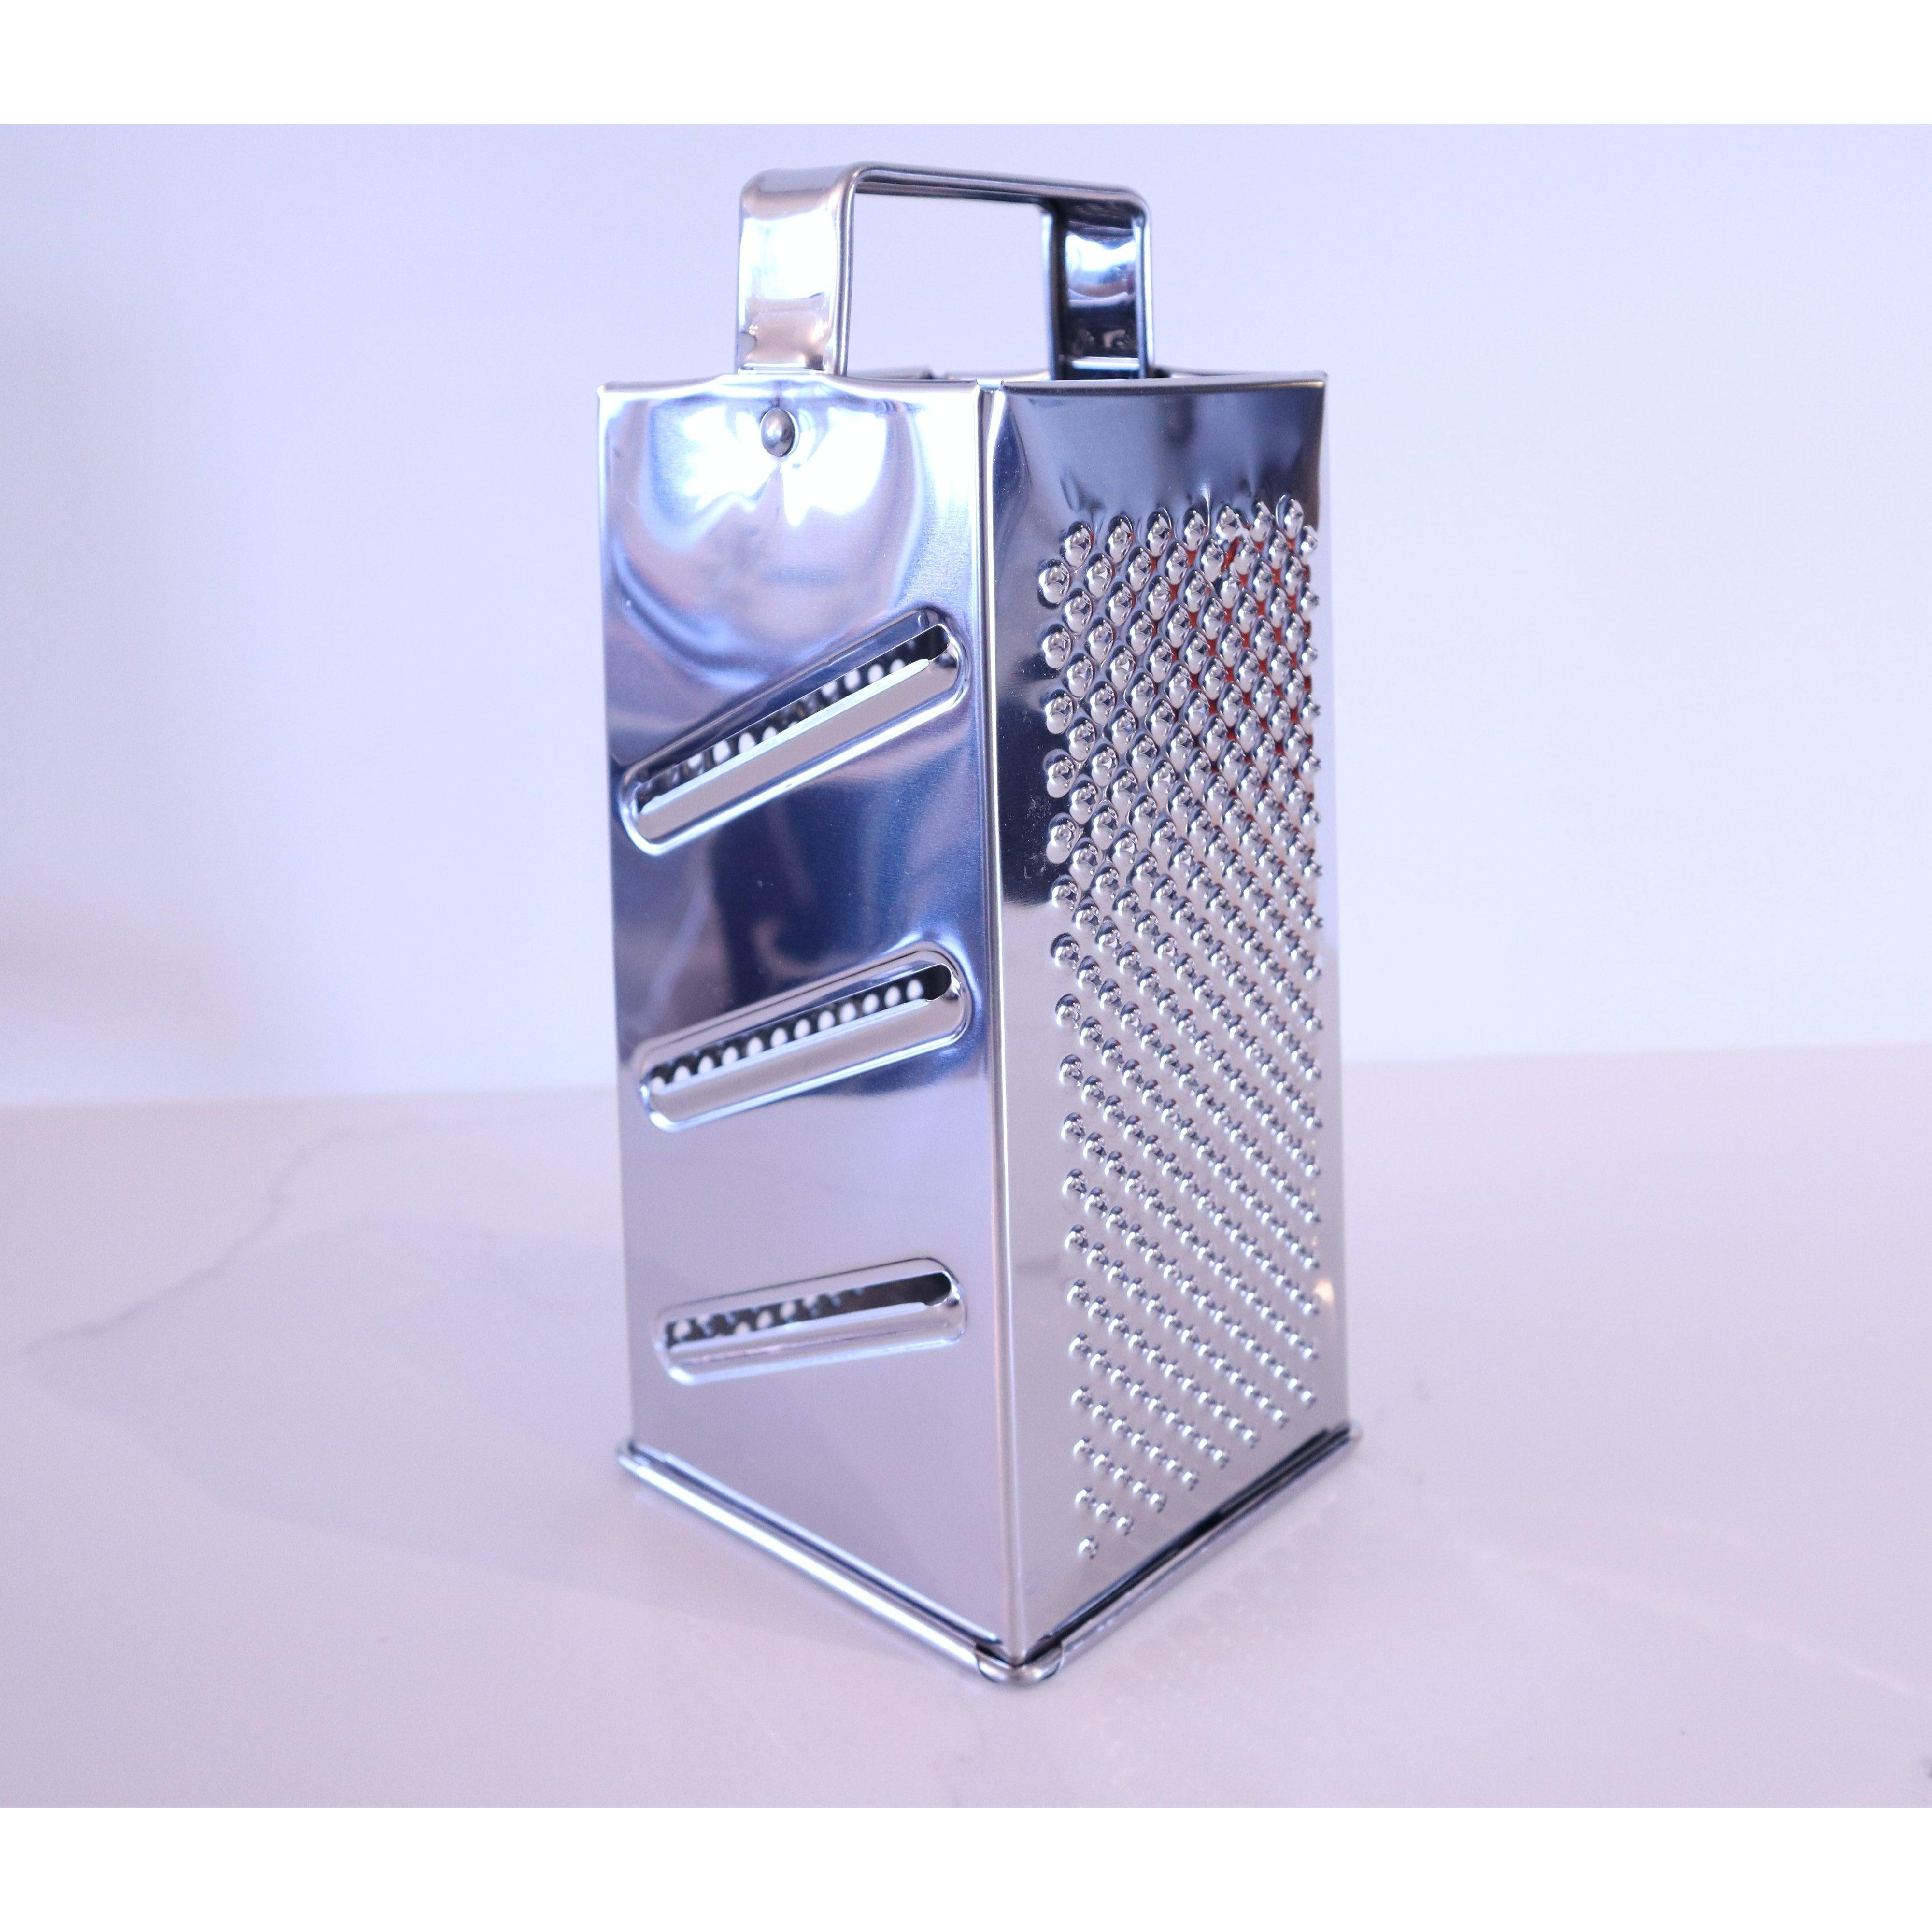 Eppicotispai Stainless Steel Box Cheese Grater 24 cm - Made in Italy Wide Cut USA